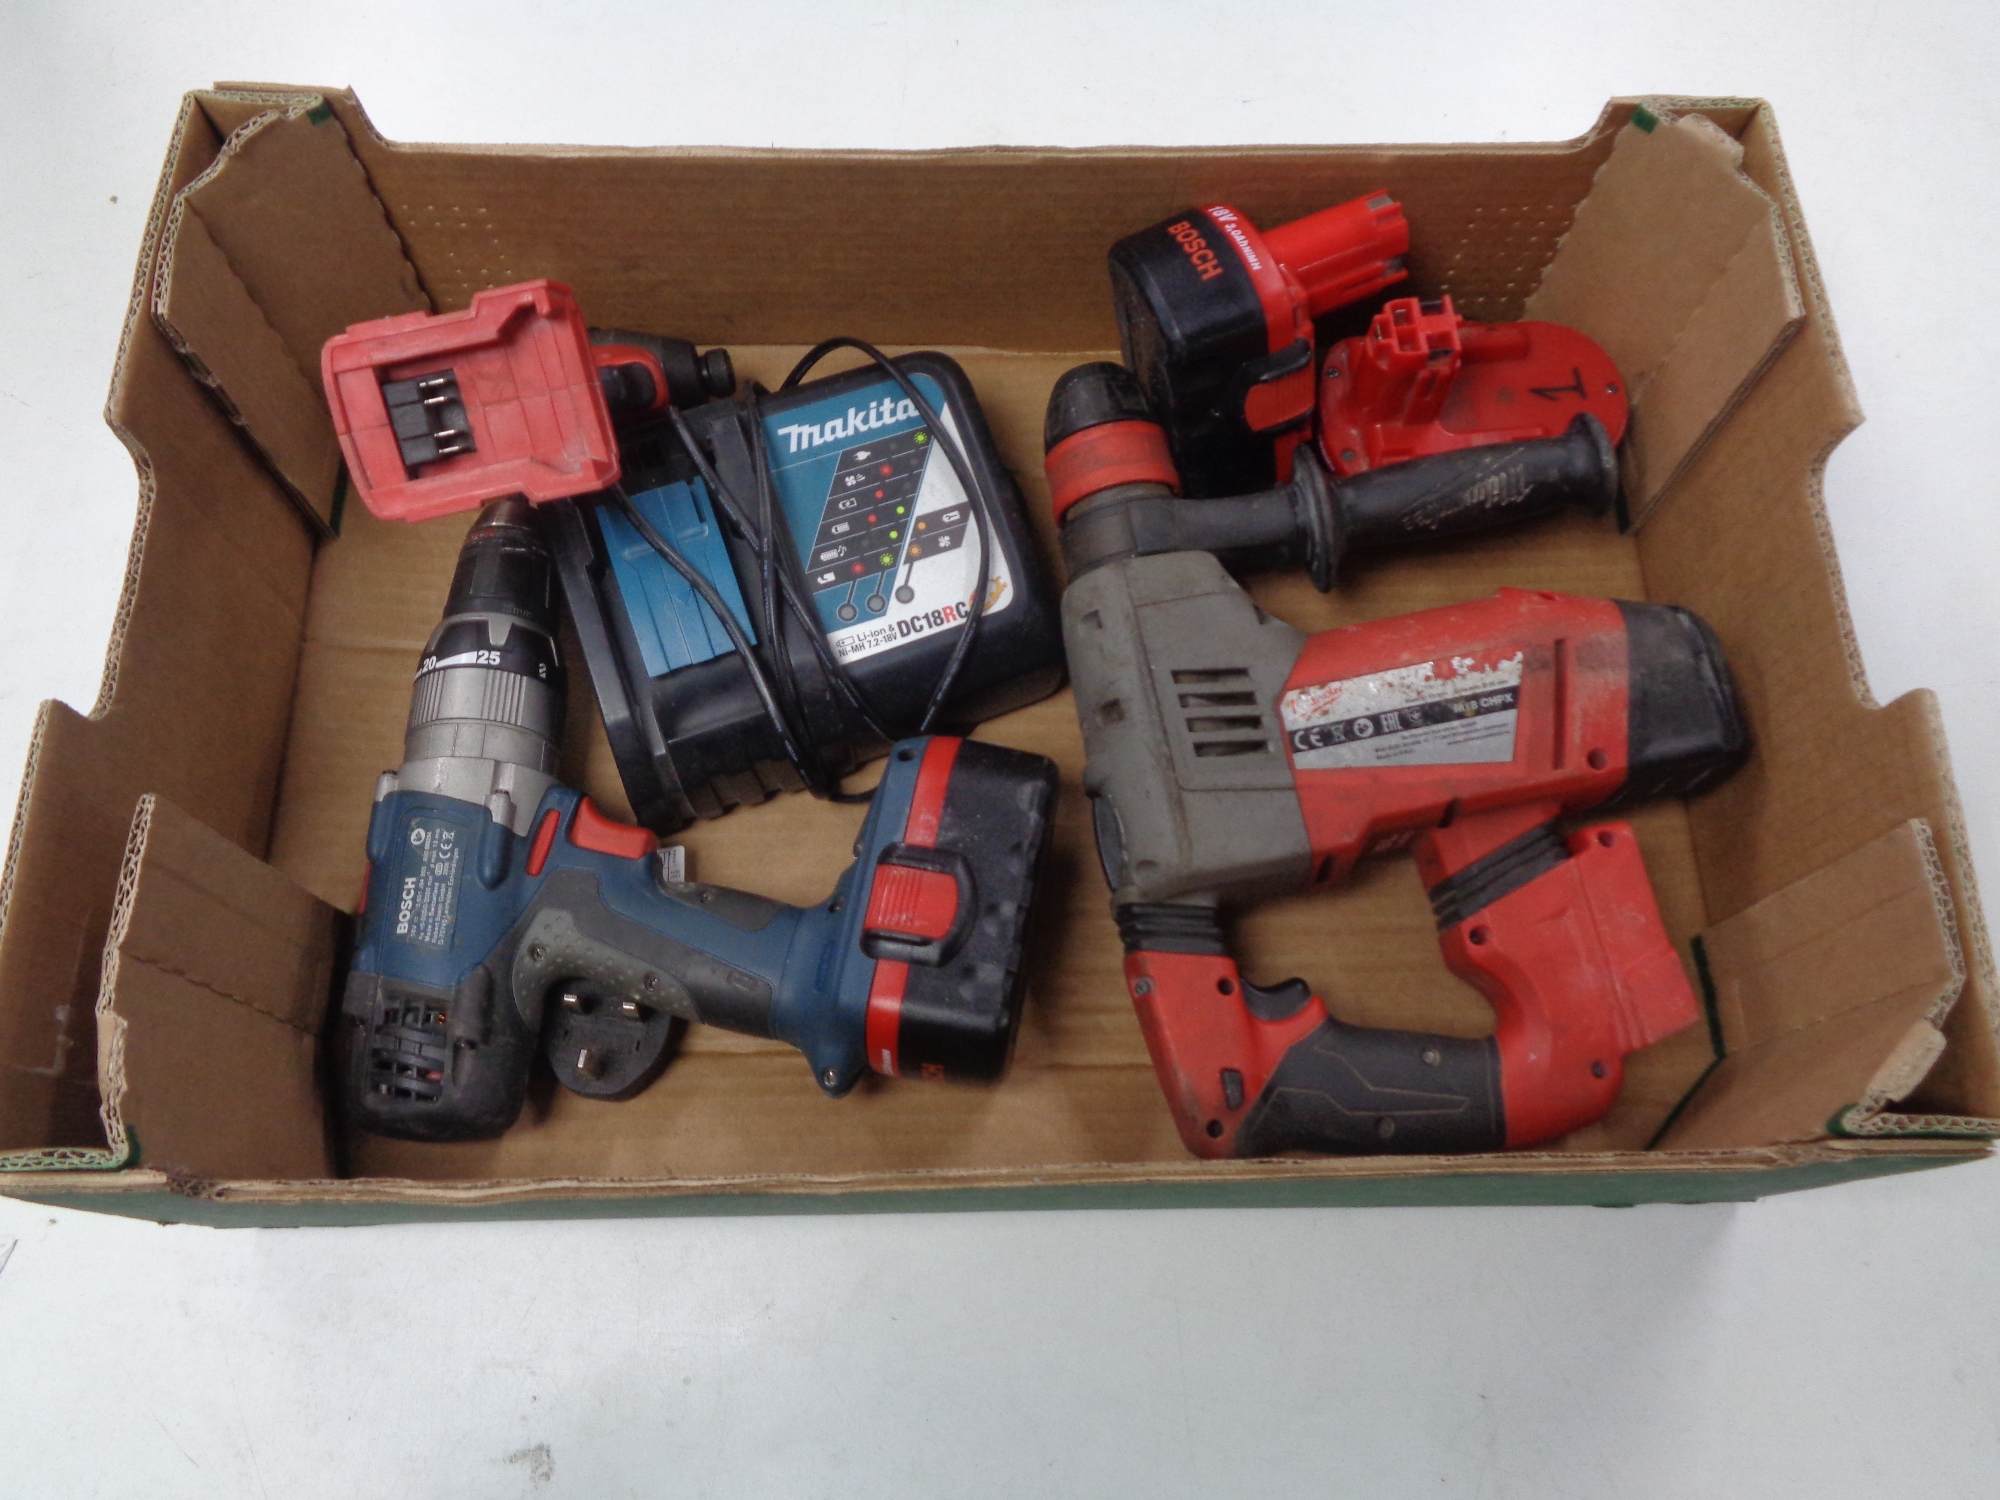 A box containing Bosch and Milwaukee electric hand drills, Makita battery charger.